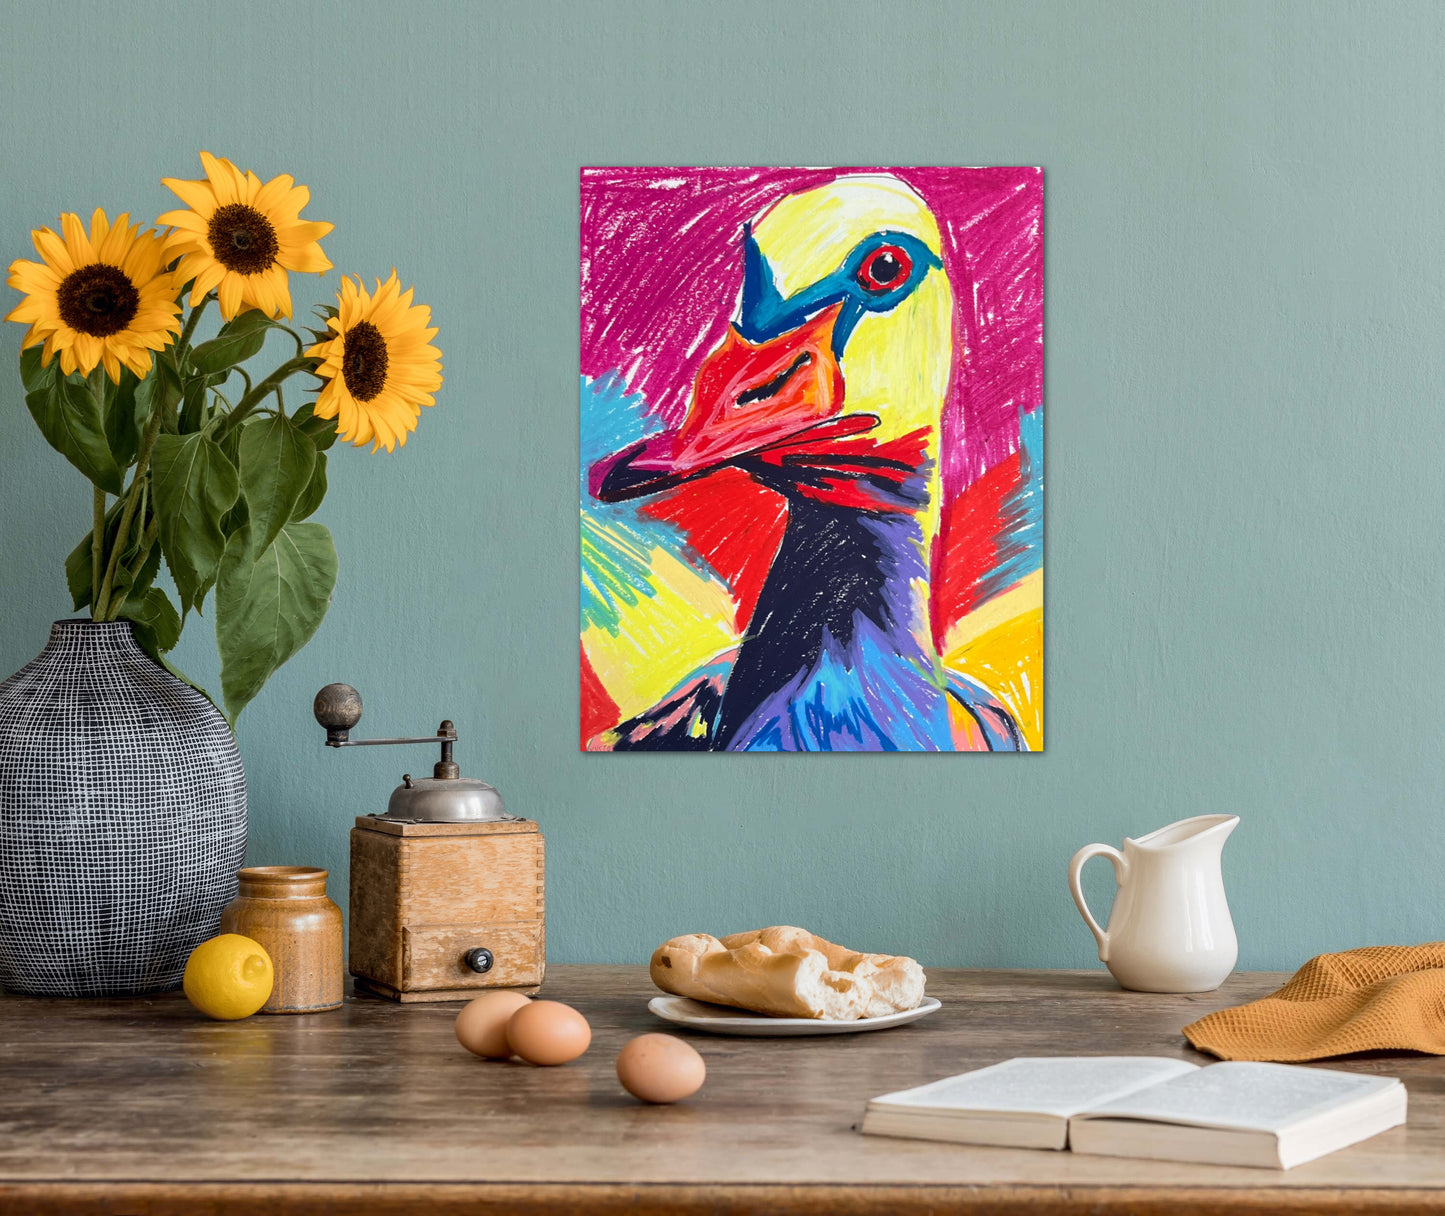 The Colorful Goose - Print, Poster, Stretched Canvas Print